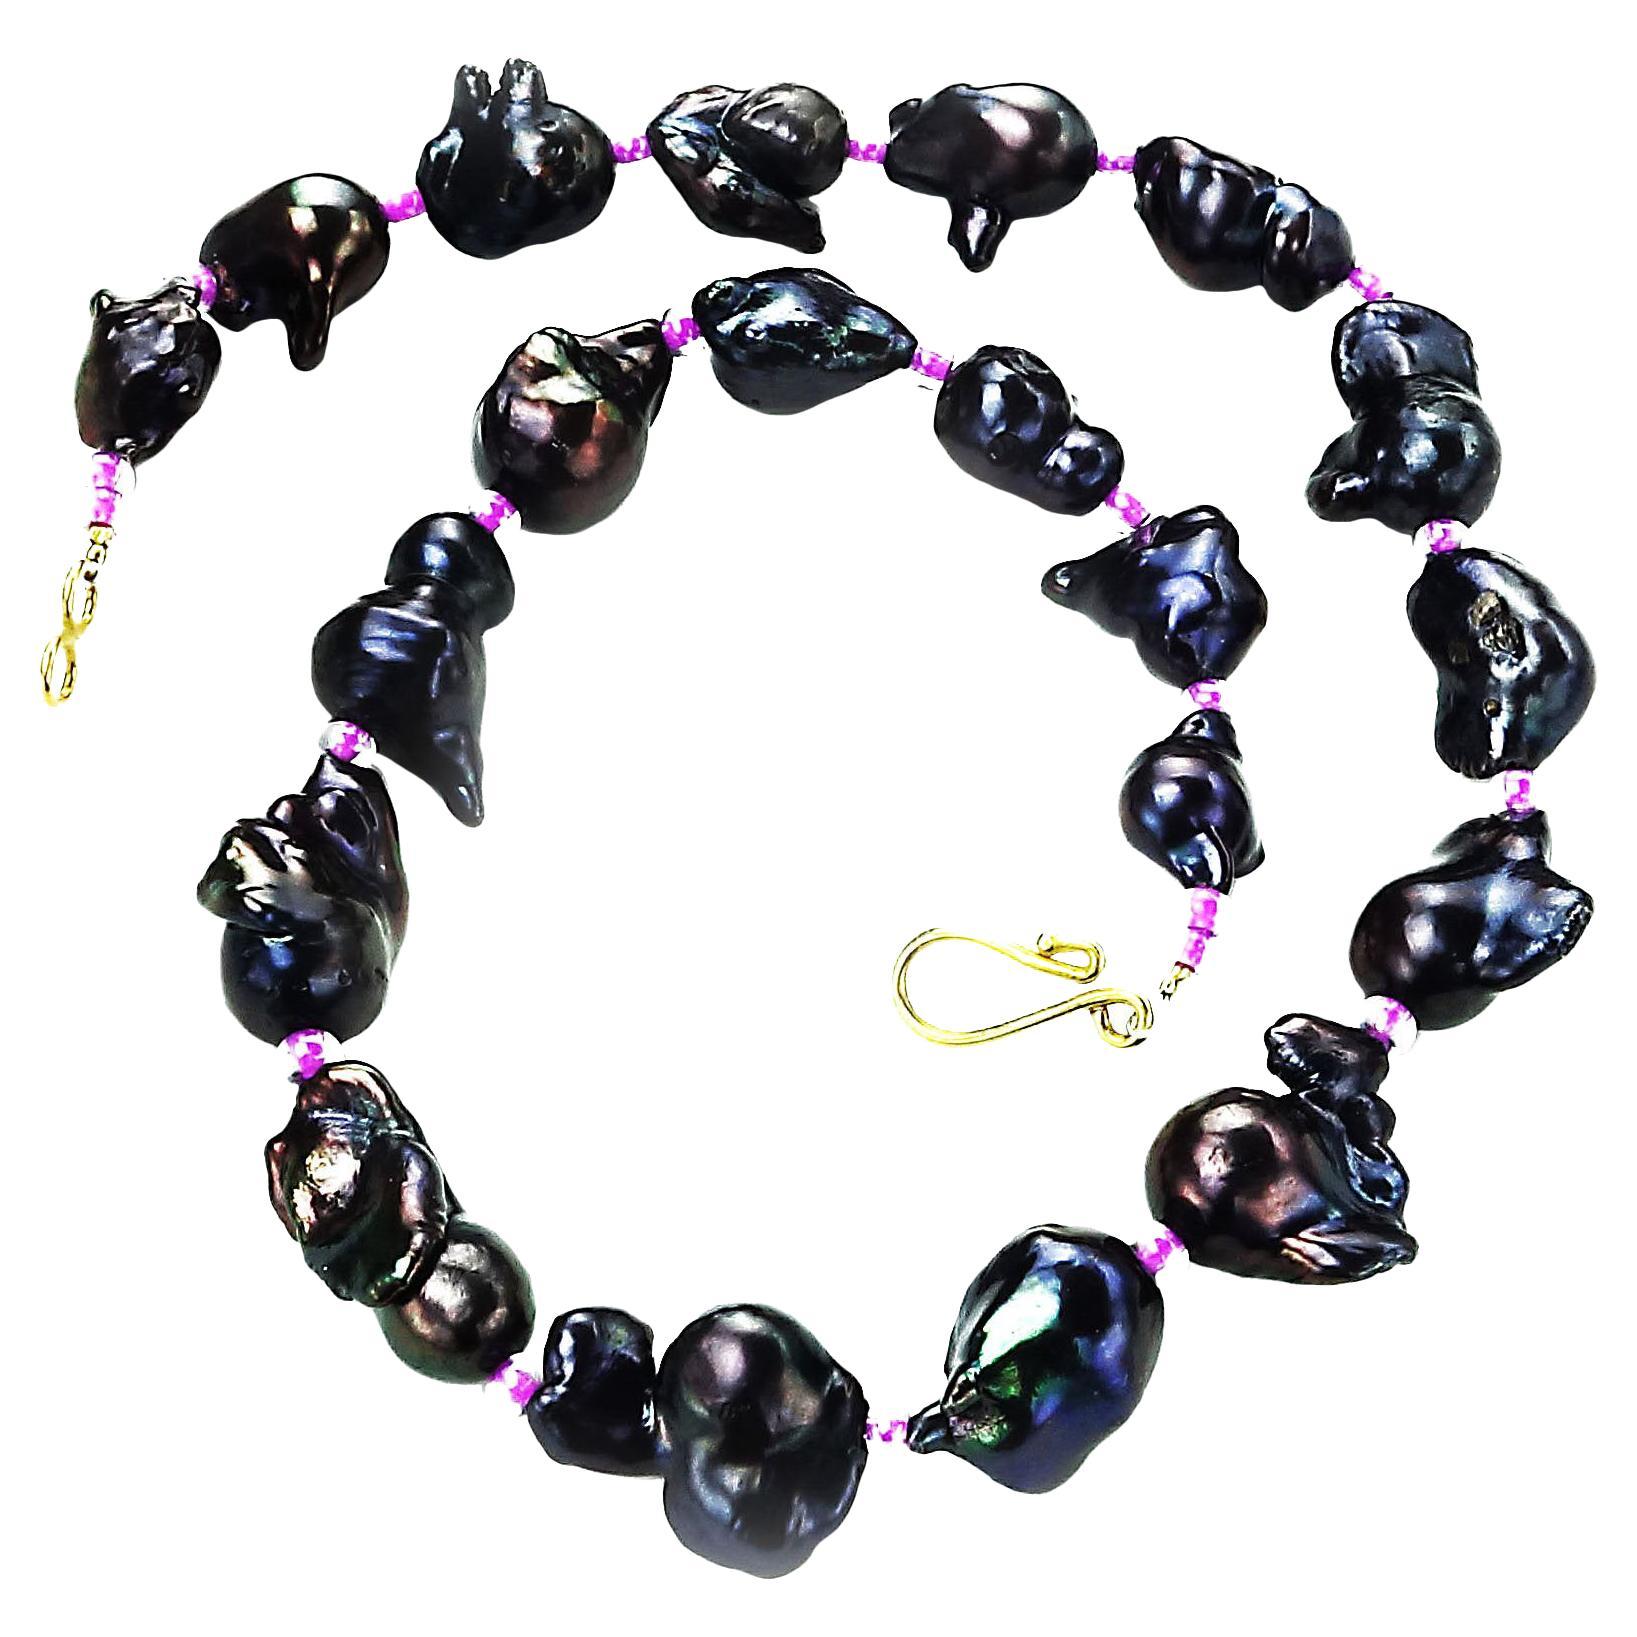 'Put on your Pearls Girls'   Lulu Guinness
Graduated Baroque Pearl necklace in iridescent deep wine red with pink czech bead accents.  These lovely, free form Baroque Pearls are graduated from 15mm to 23mm and secured with a hook of 18K gold